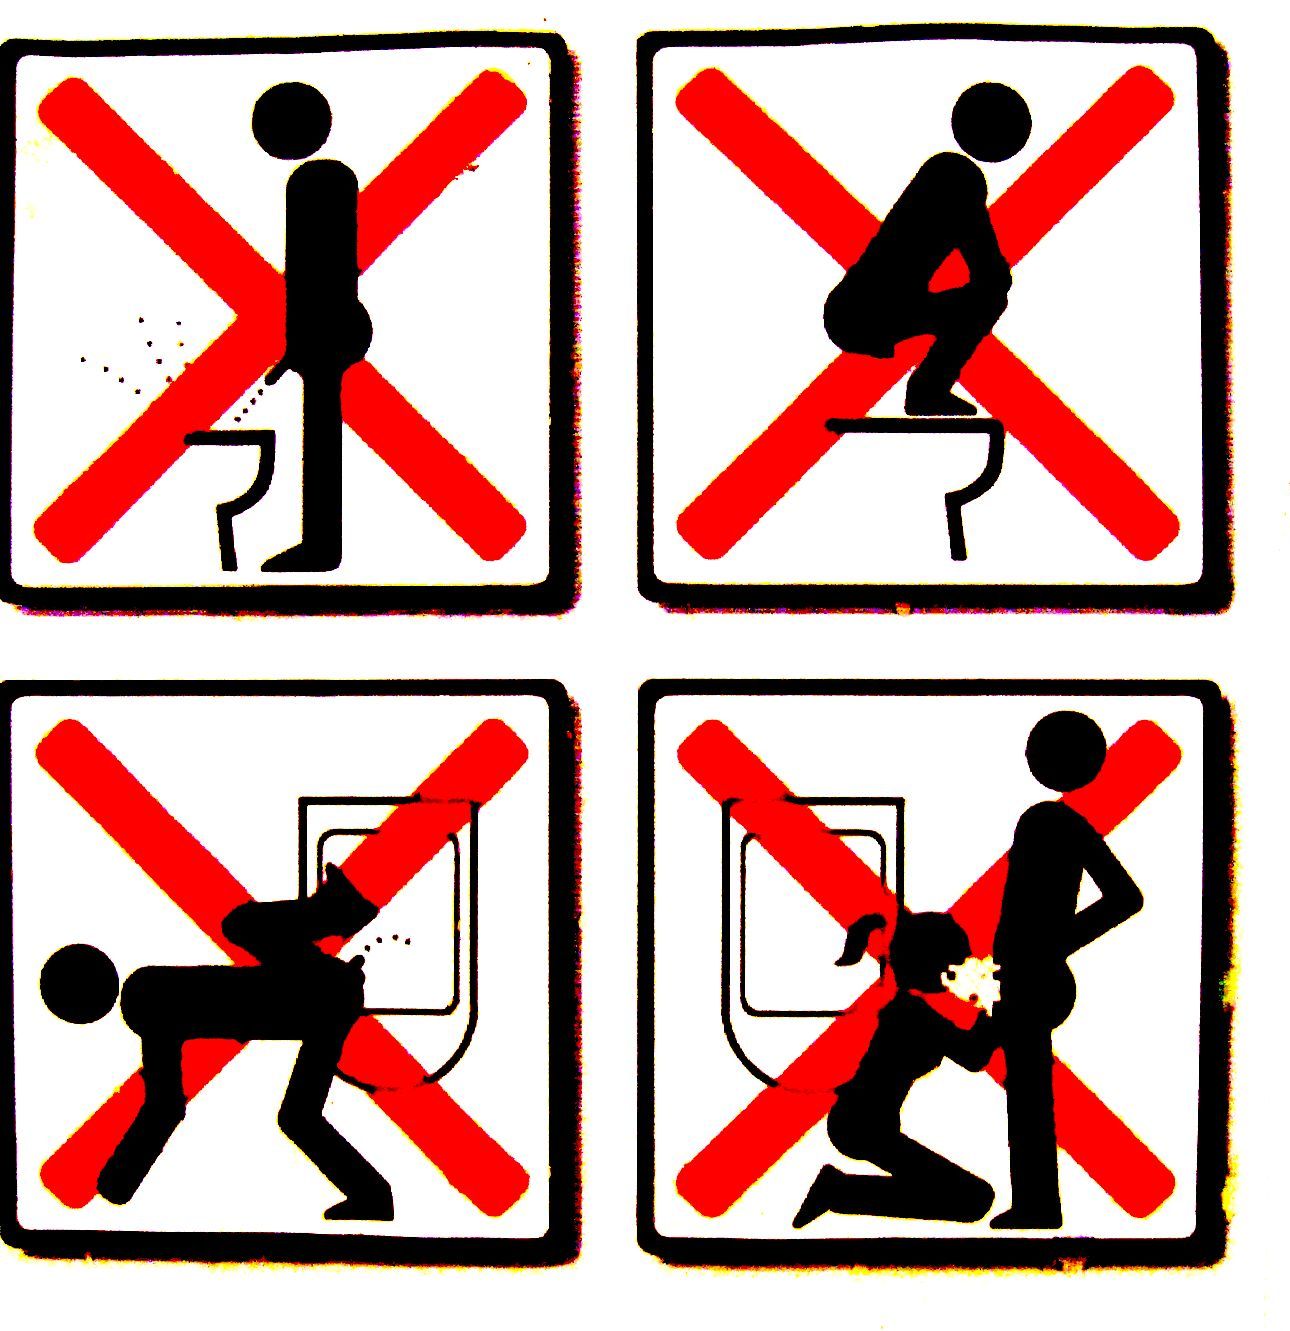 four warning signs depicting the steps to toilet and shower